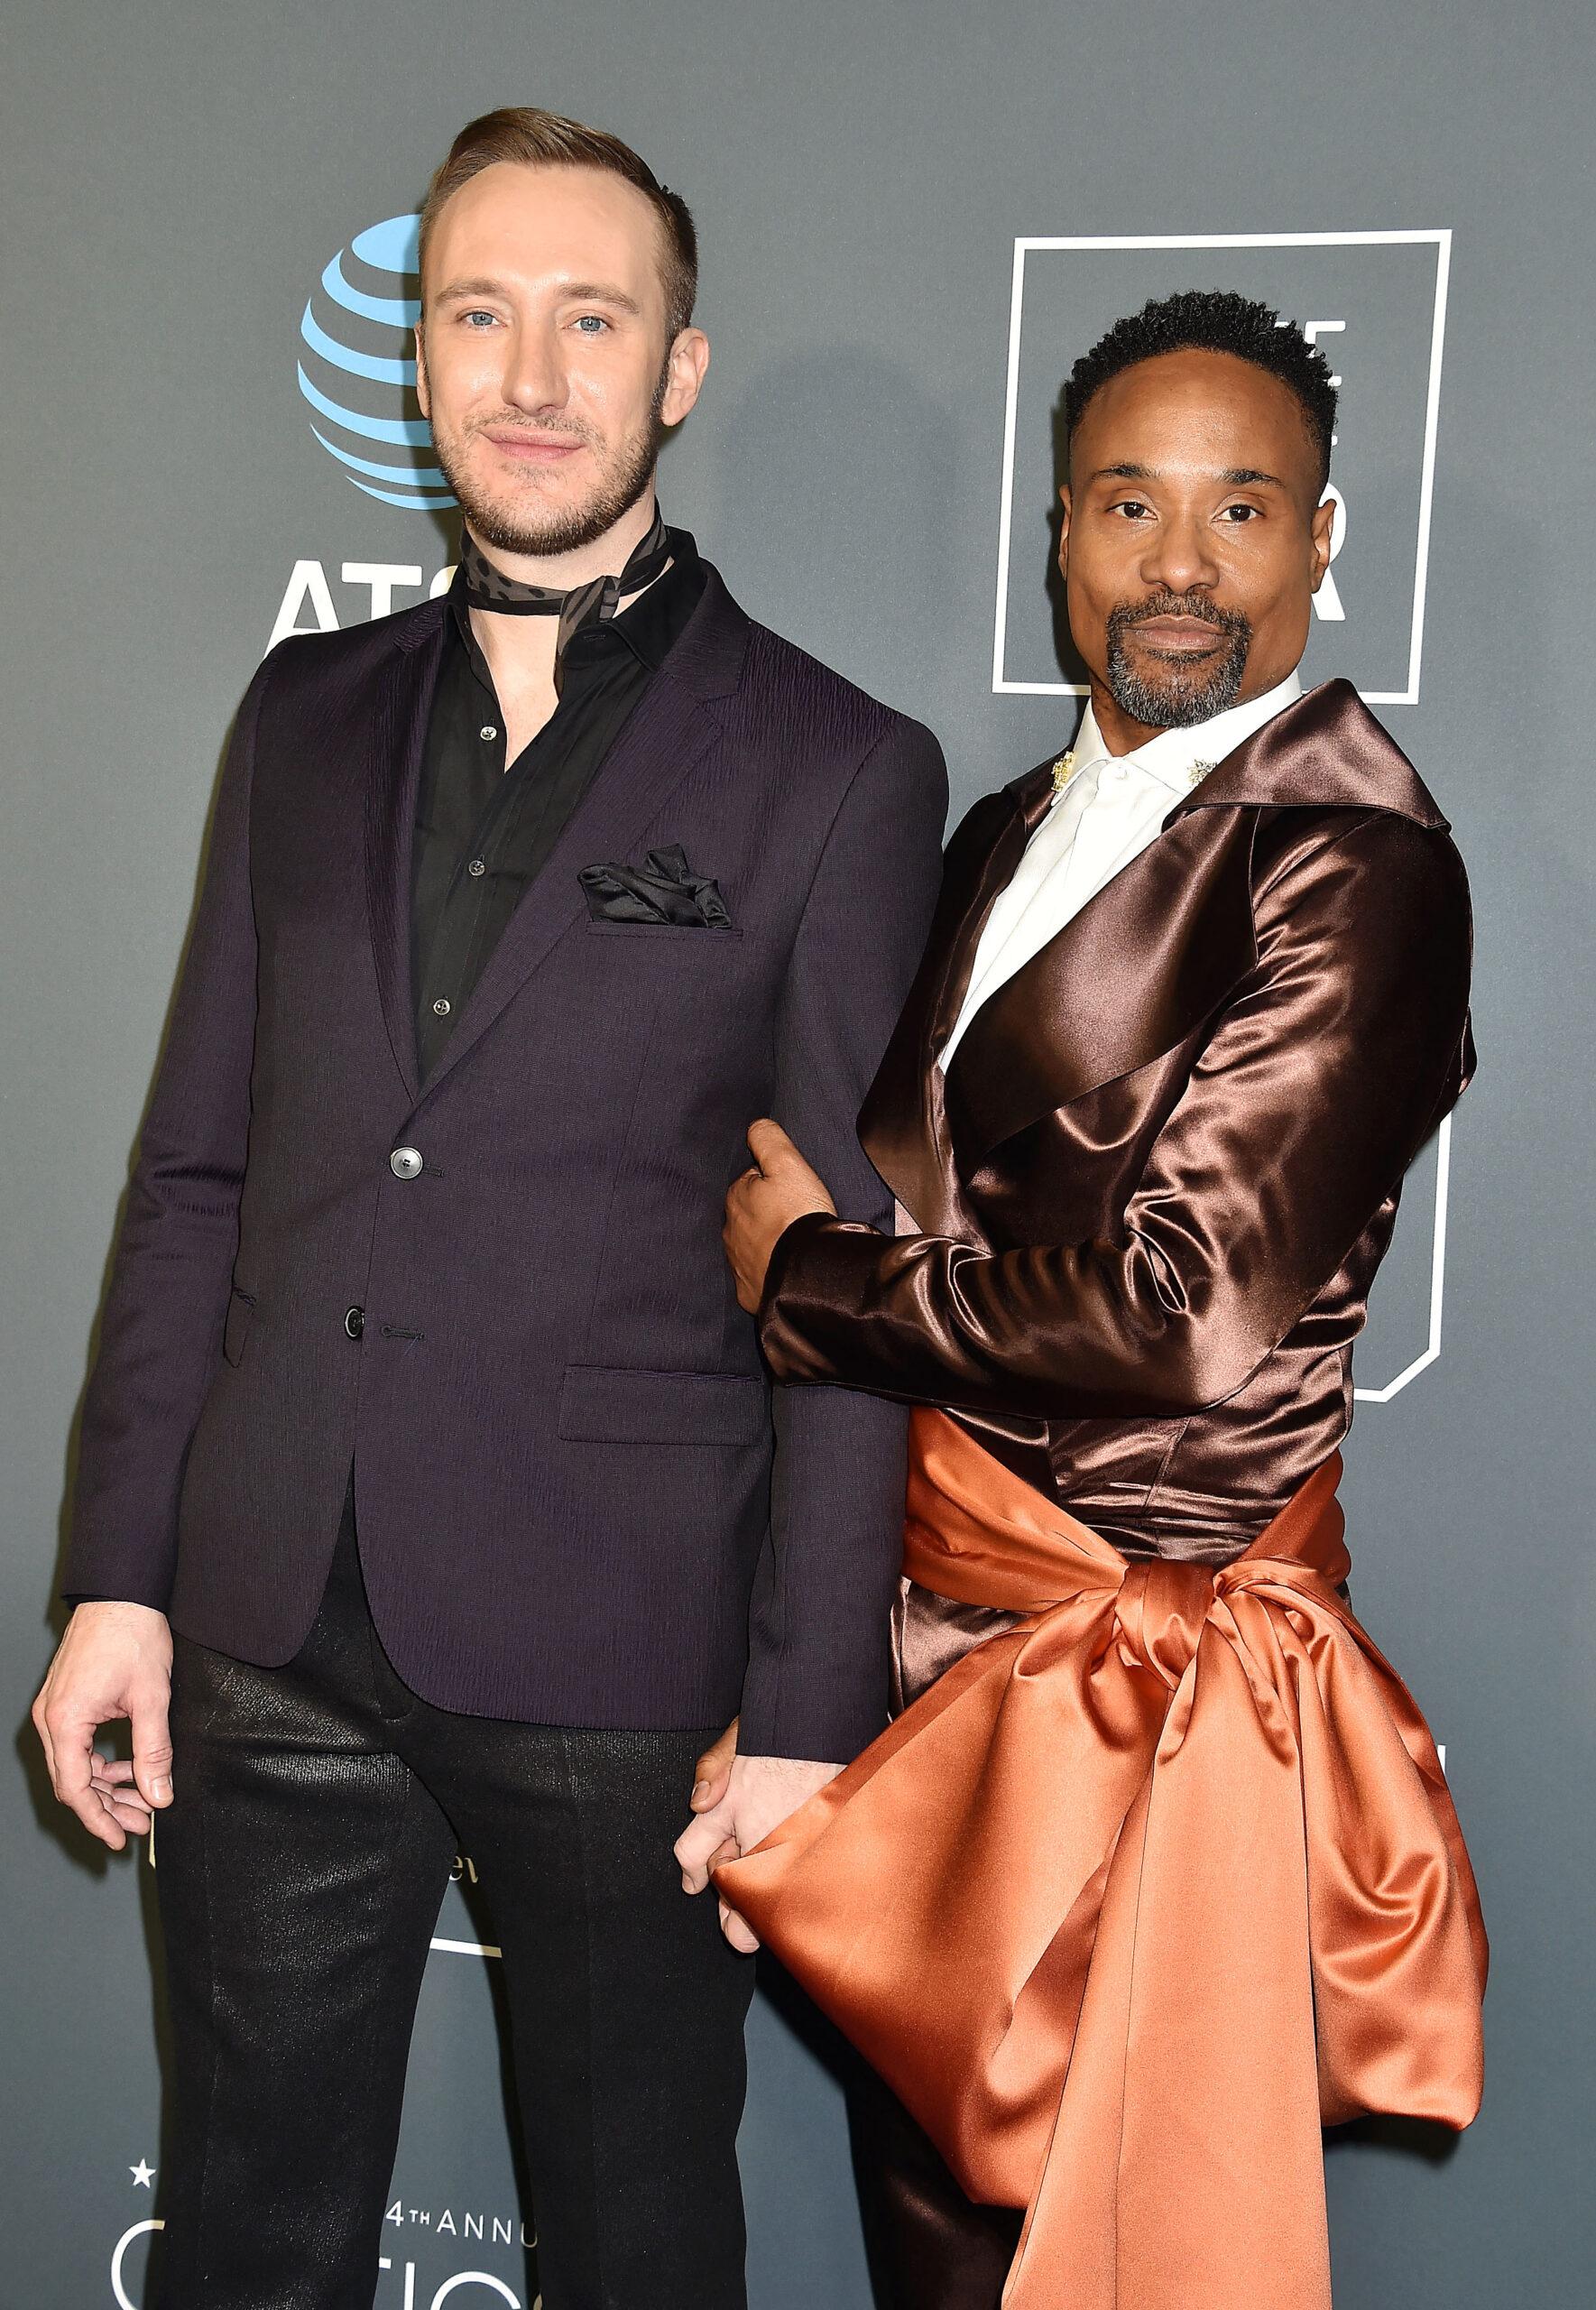 A photo showing Billy Porter and ex-husband Adam Smith at an awards show